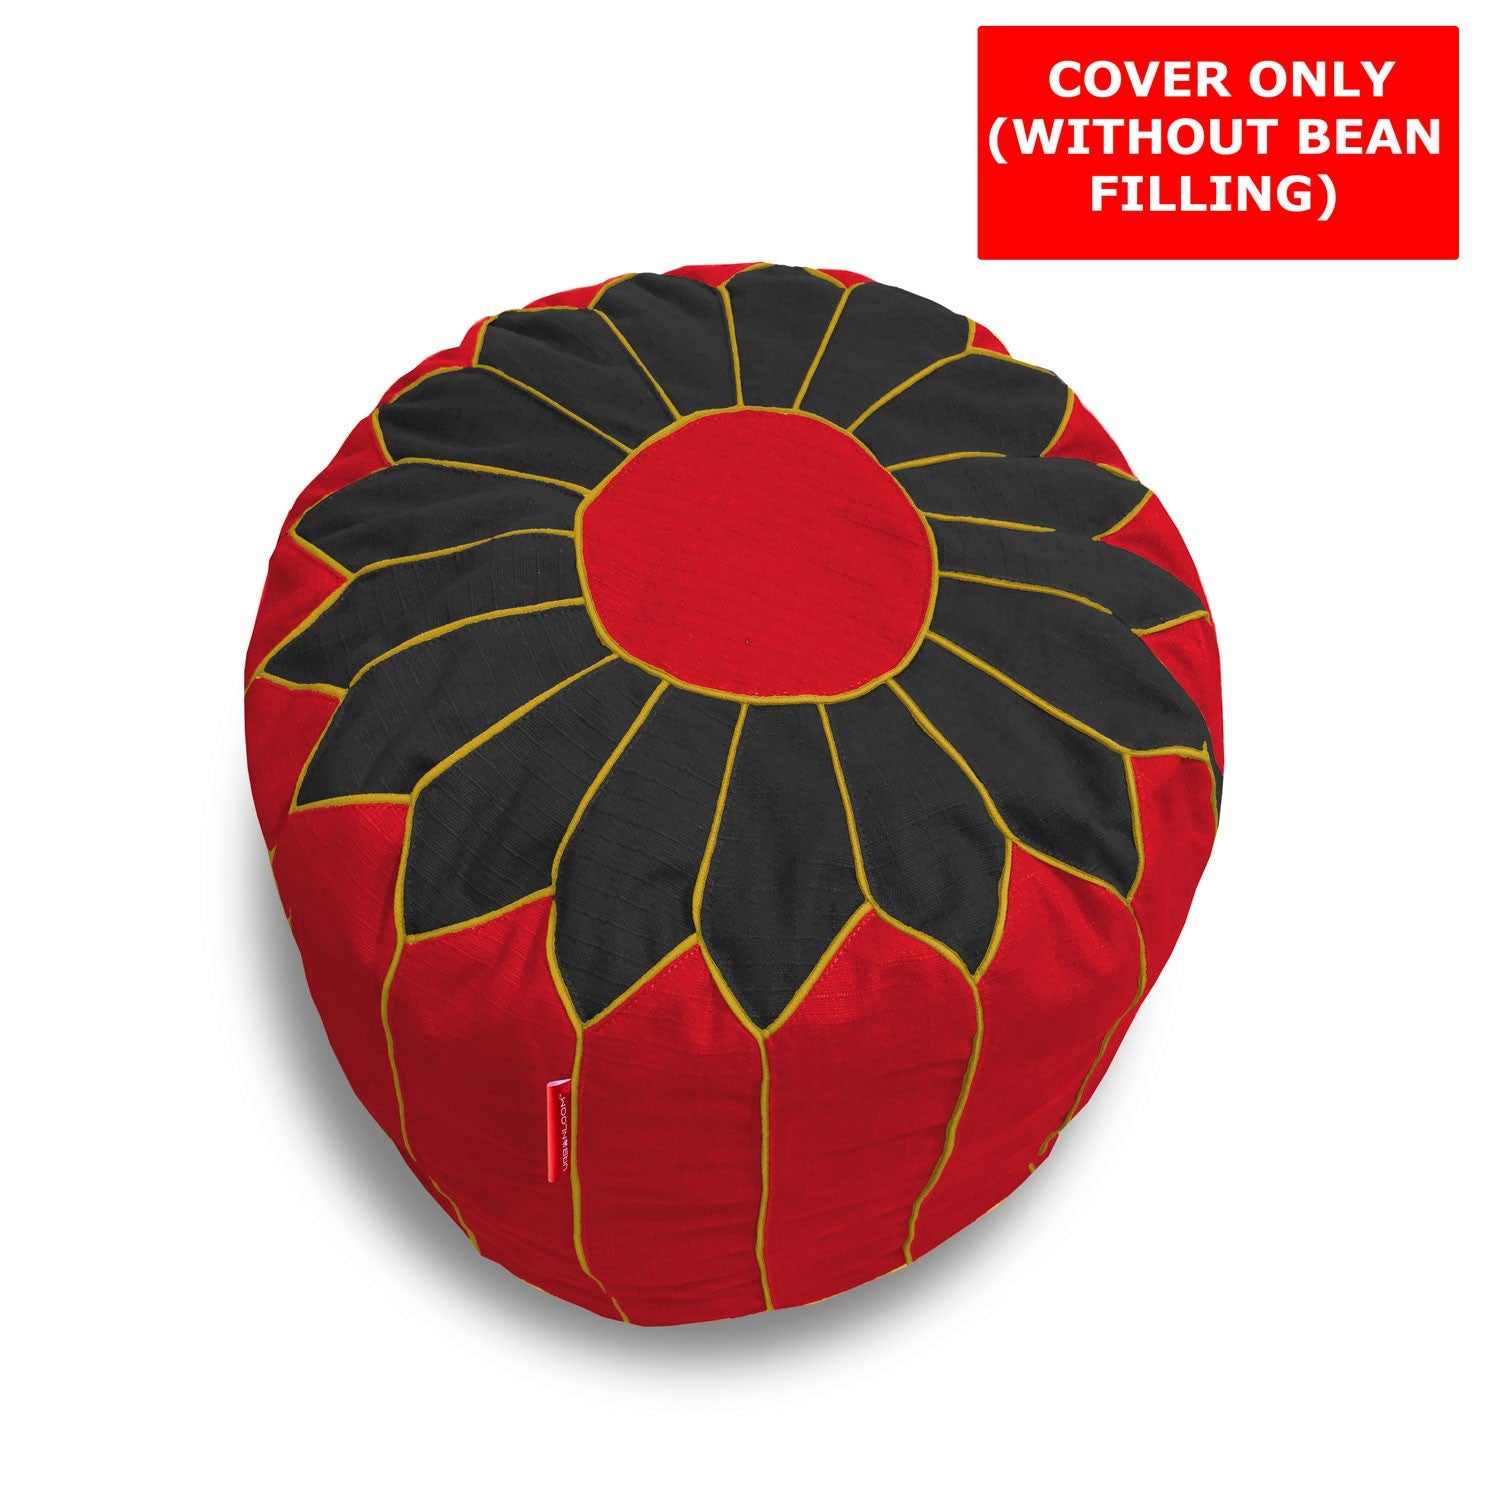 Scarlet organic cotton Football bean bag Cover & Footstool cover